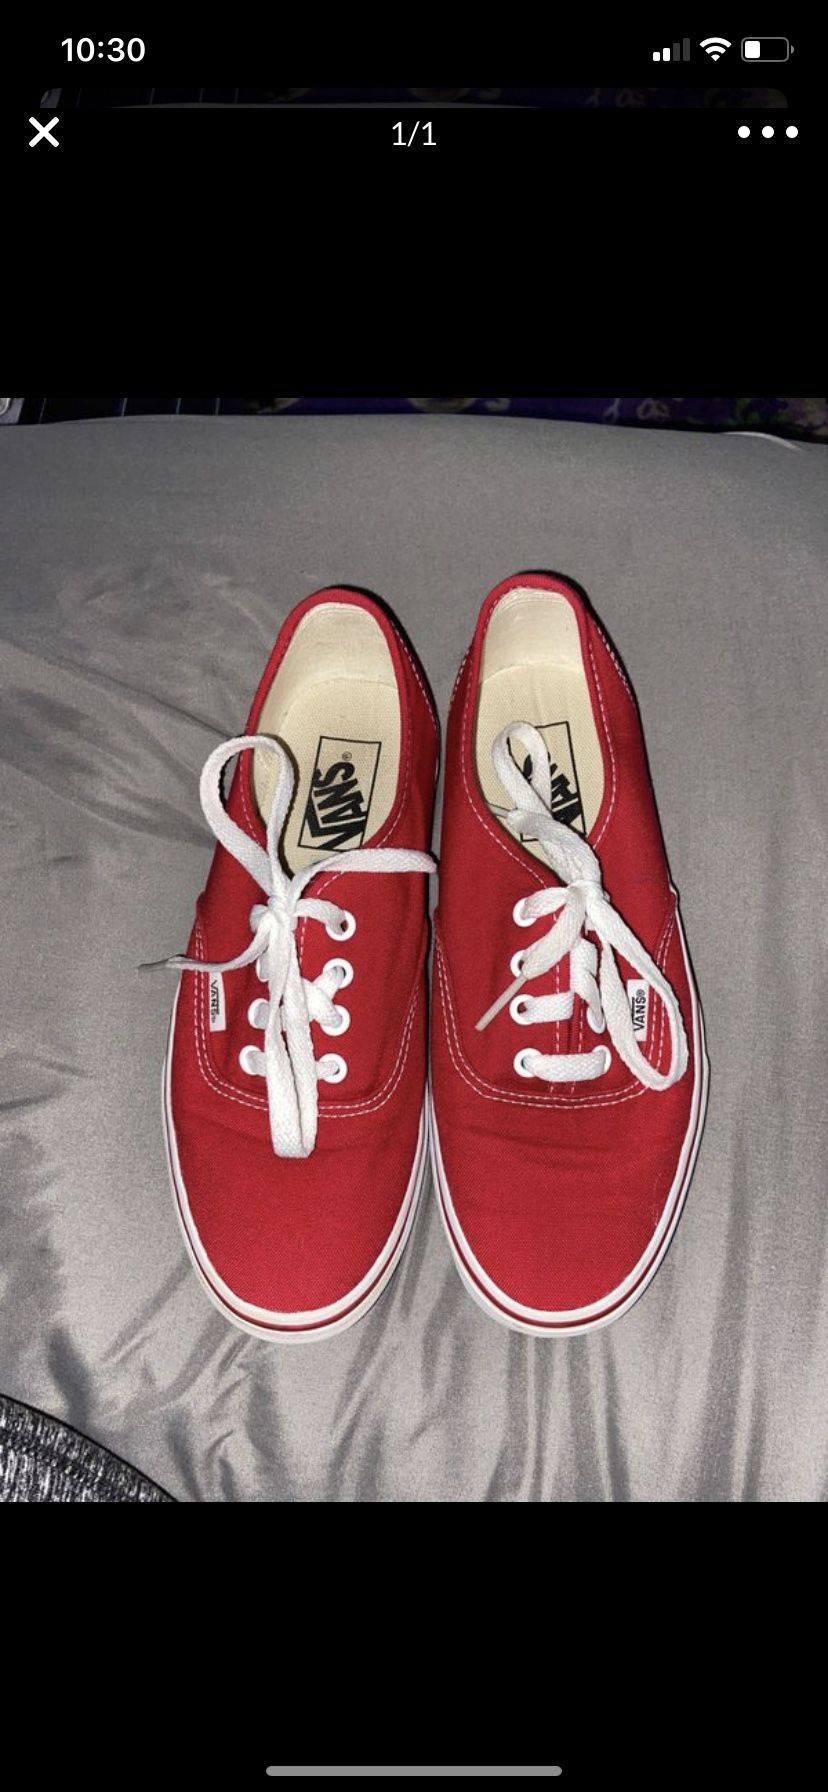 Red vans shoes